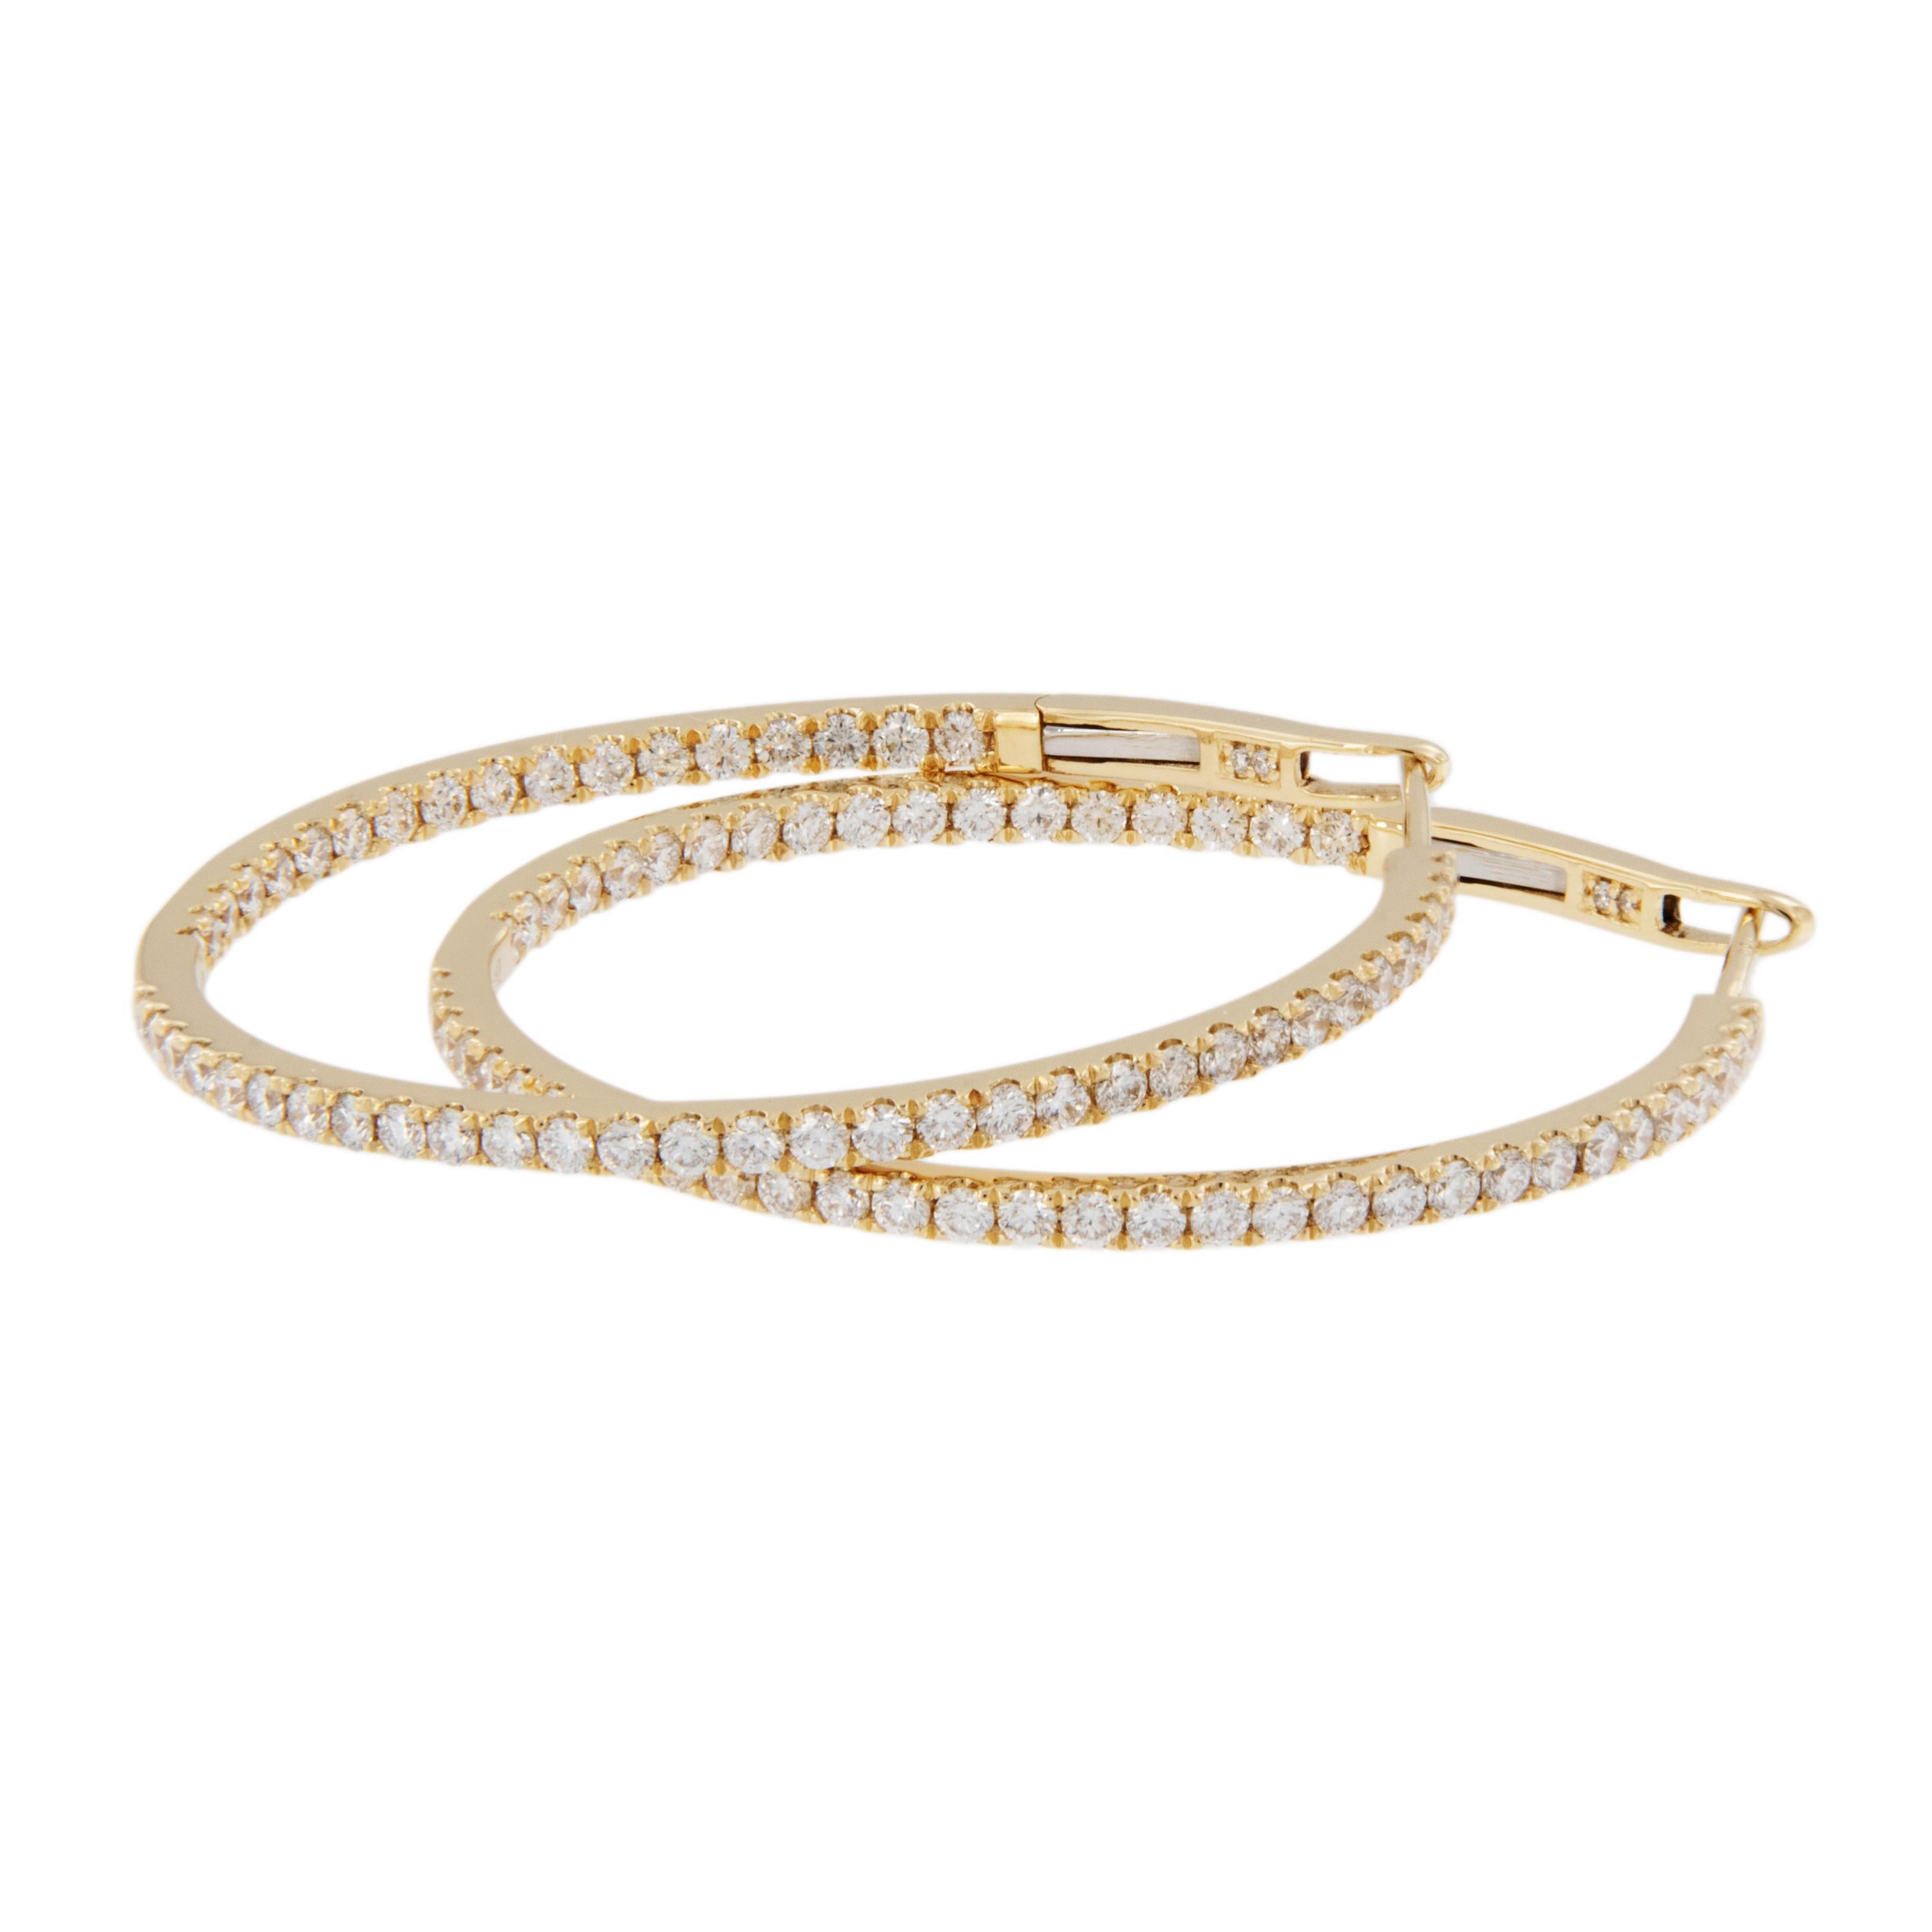 These are the most durable diamond hoops you can get - solid with no hinge to wear out or become loose. Top that off with rich 18 karat yellow gold and 104 RBC diamonds = 1.76 Cttw being VS and F - G - H color  you can't go wrong. Timeless look that